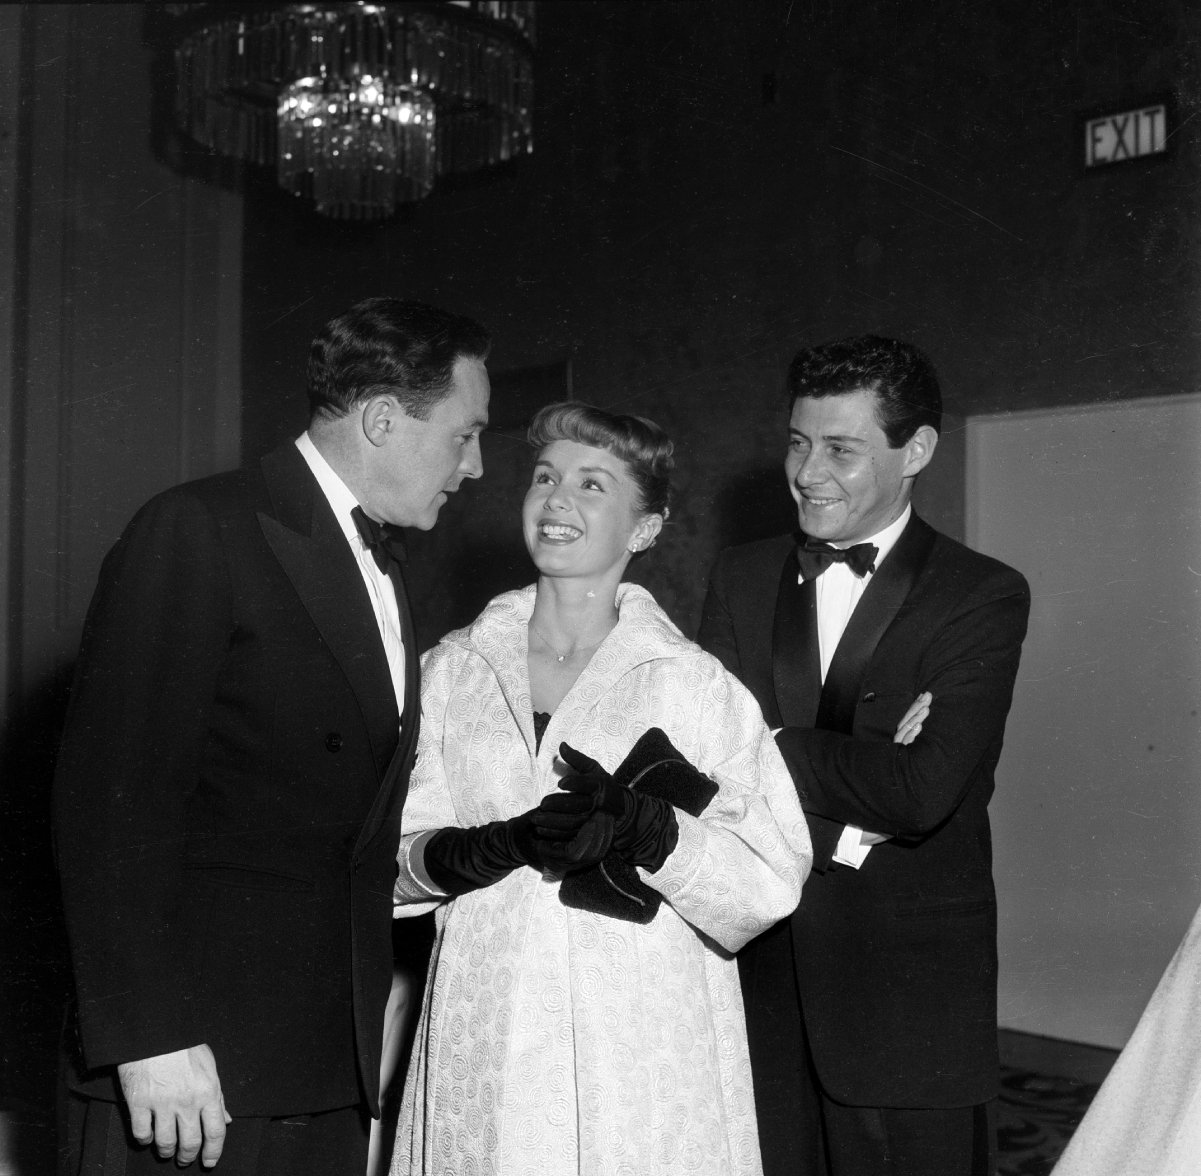 From left, Gene Kelly with Debbie Reynolds and her husband, Eddie Fisher in 1957